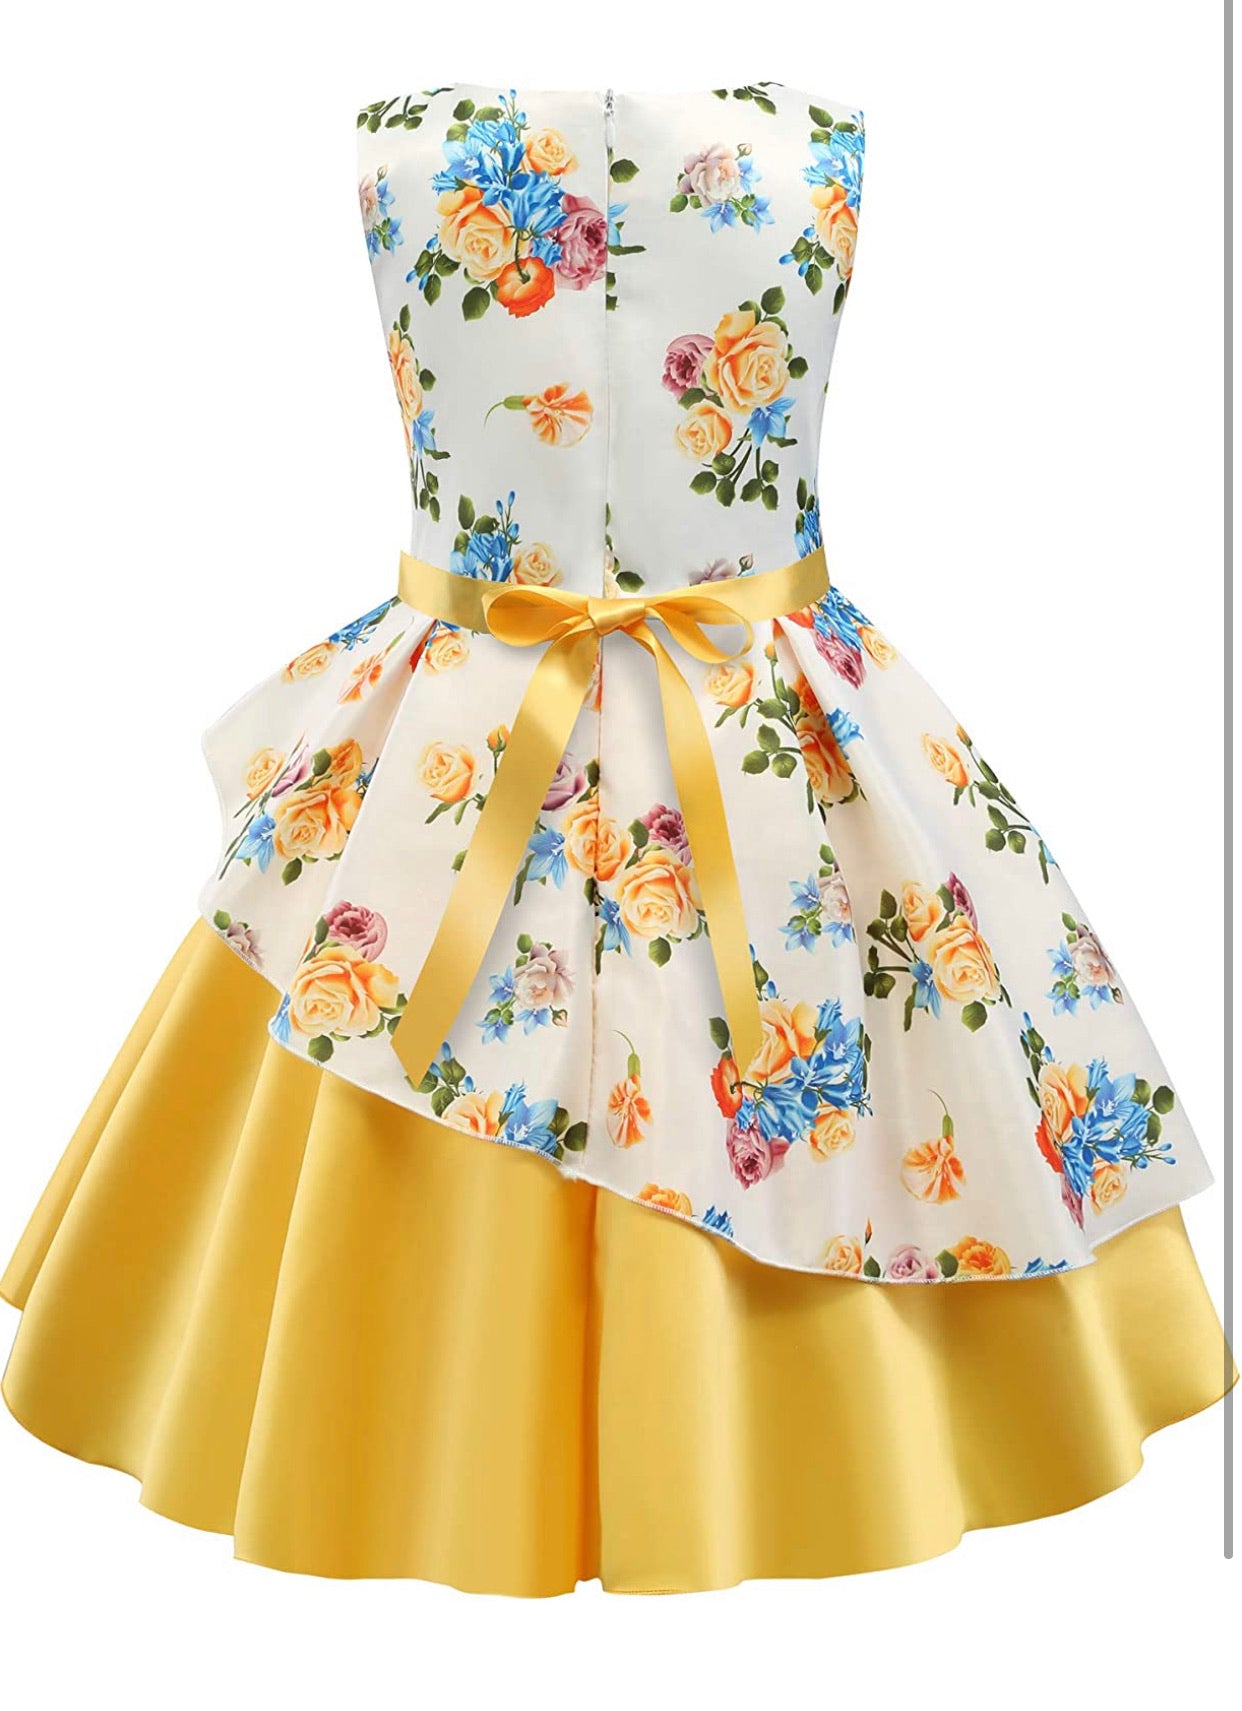 Little Girl’s Formal Floral Print Dress, Sizes 2T - 9 years (Yellow)